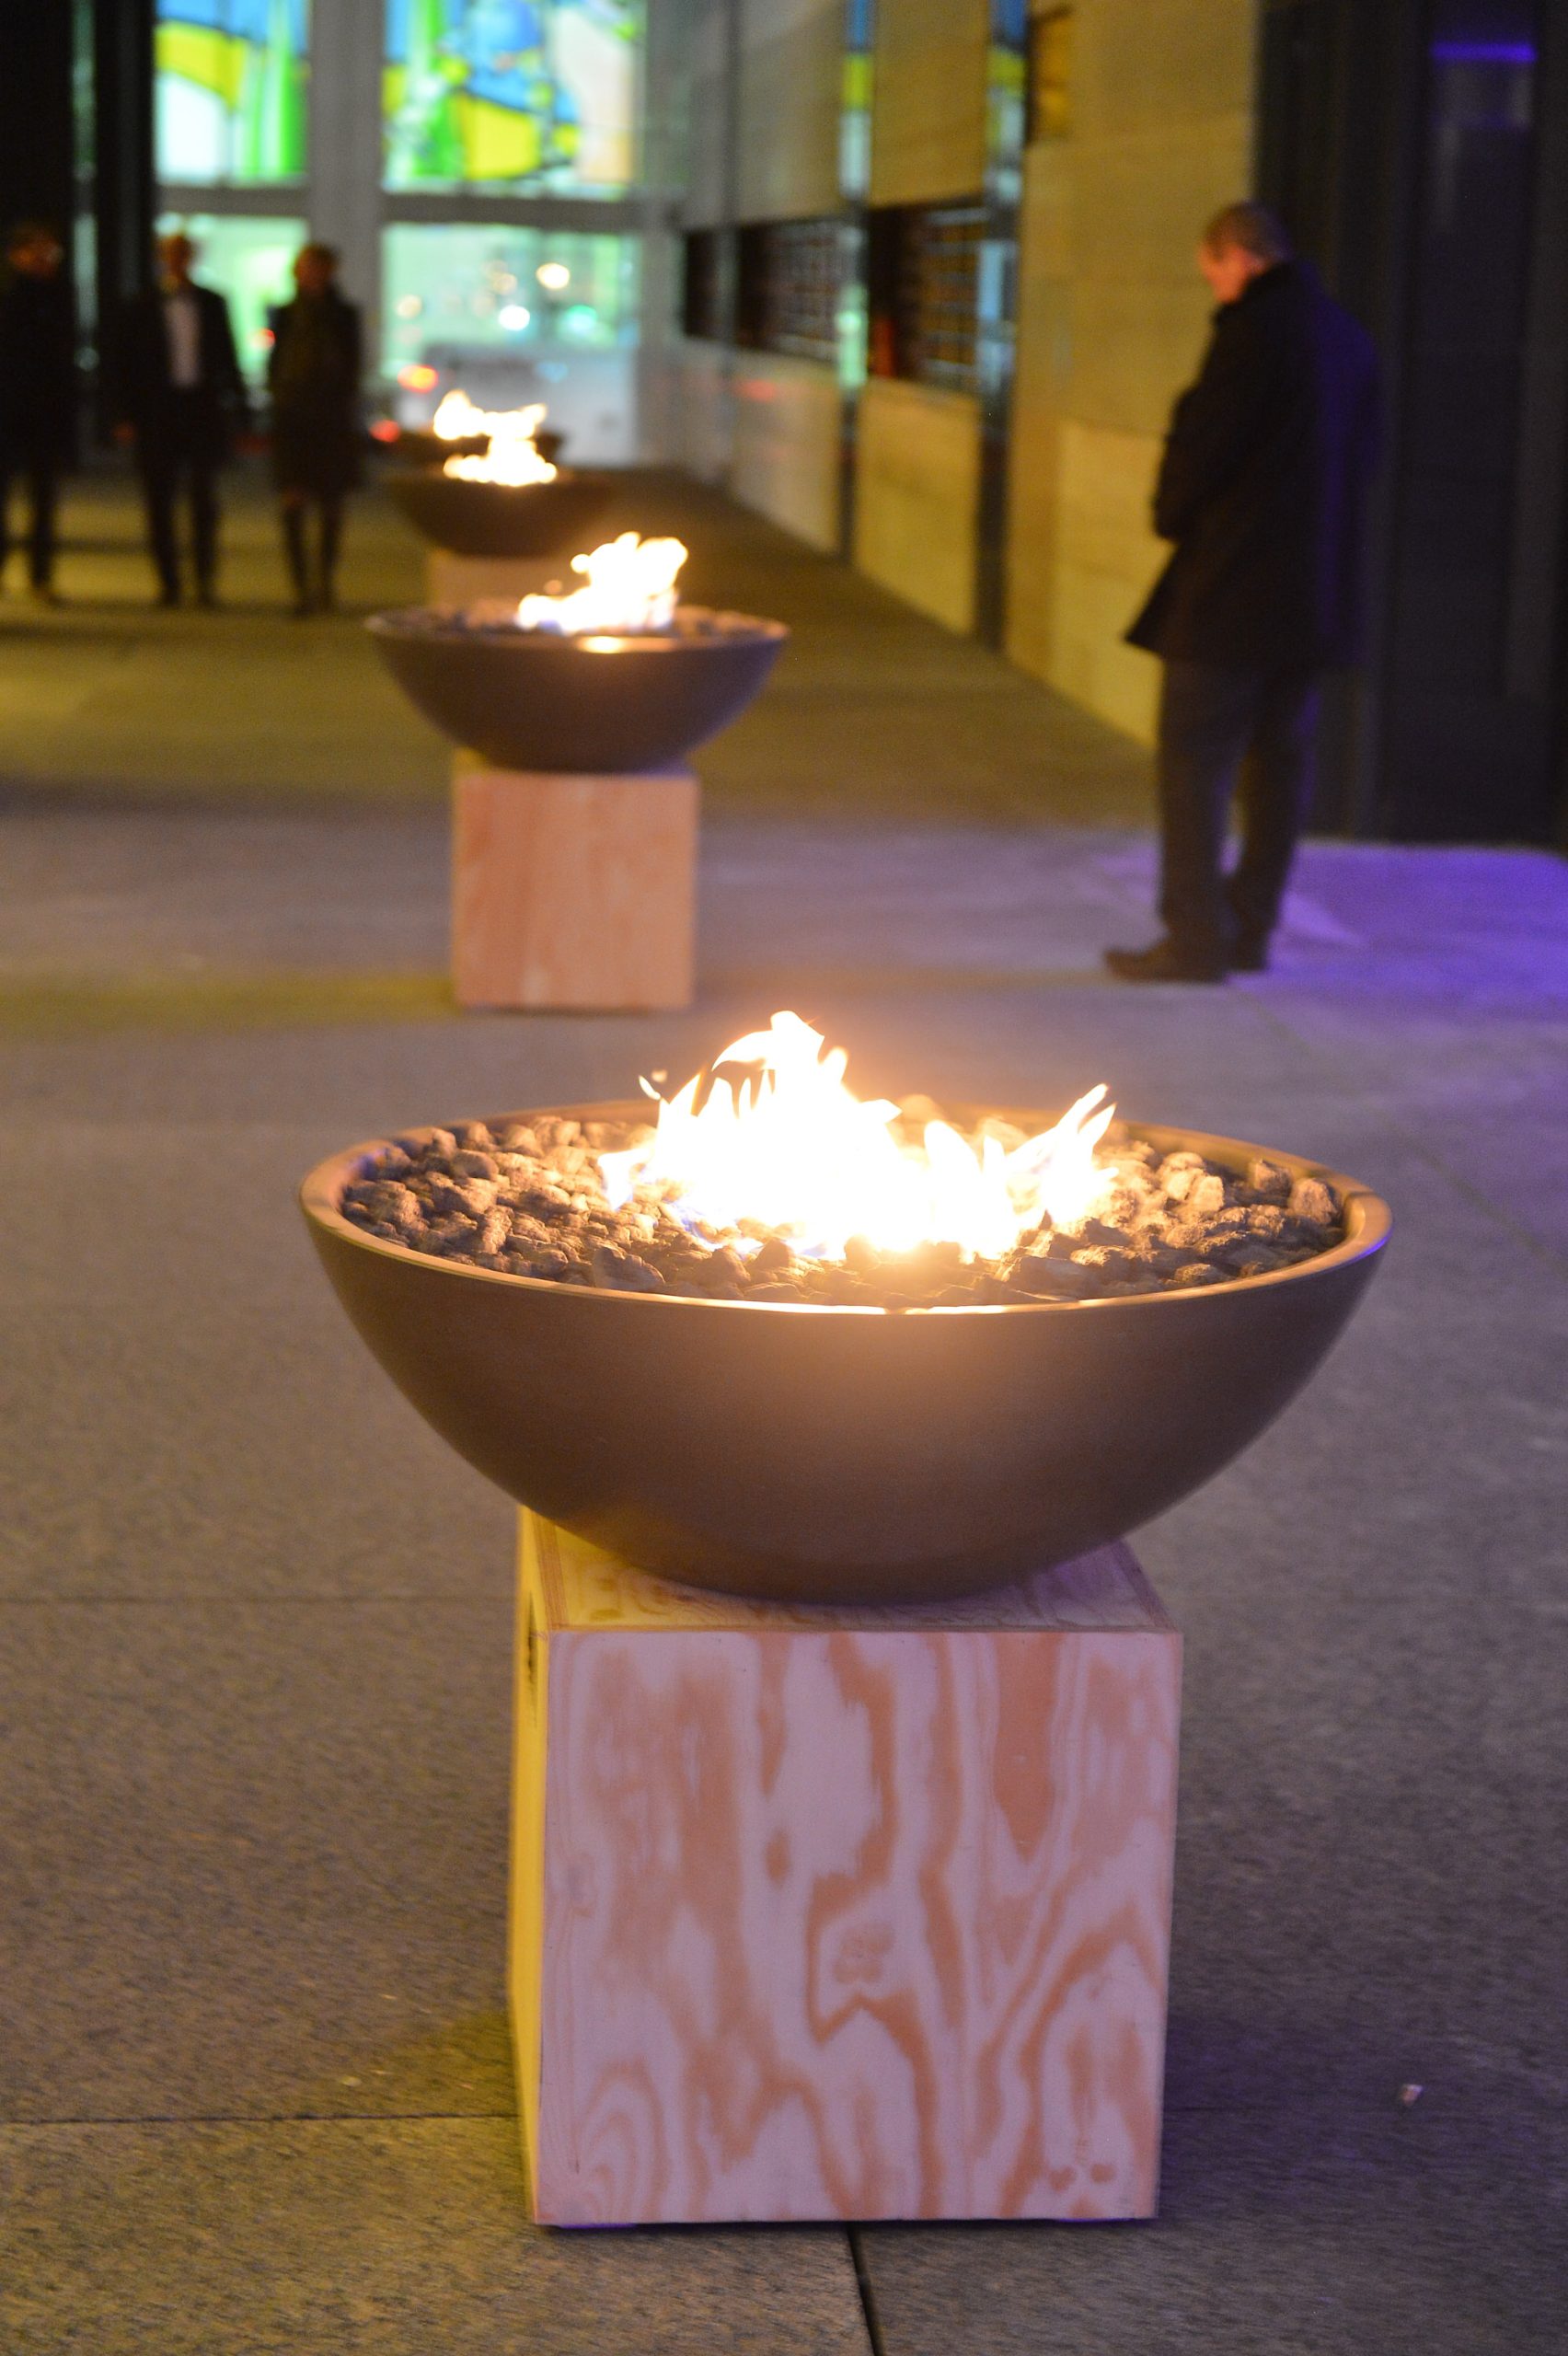 Miso Modern Firebowls at the Design Exchange Intersection Event